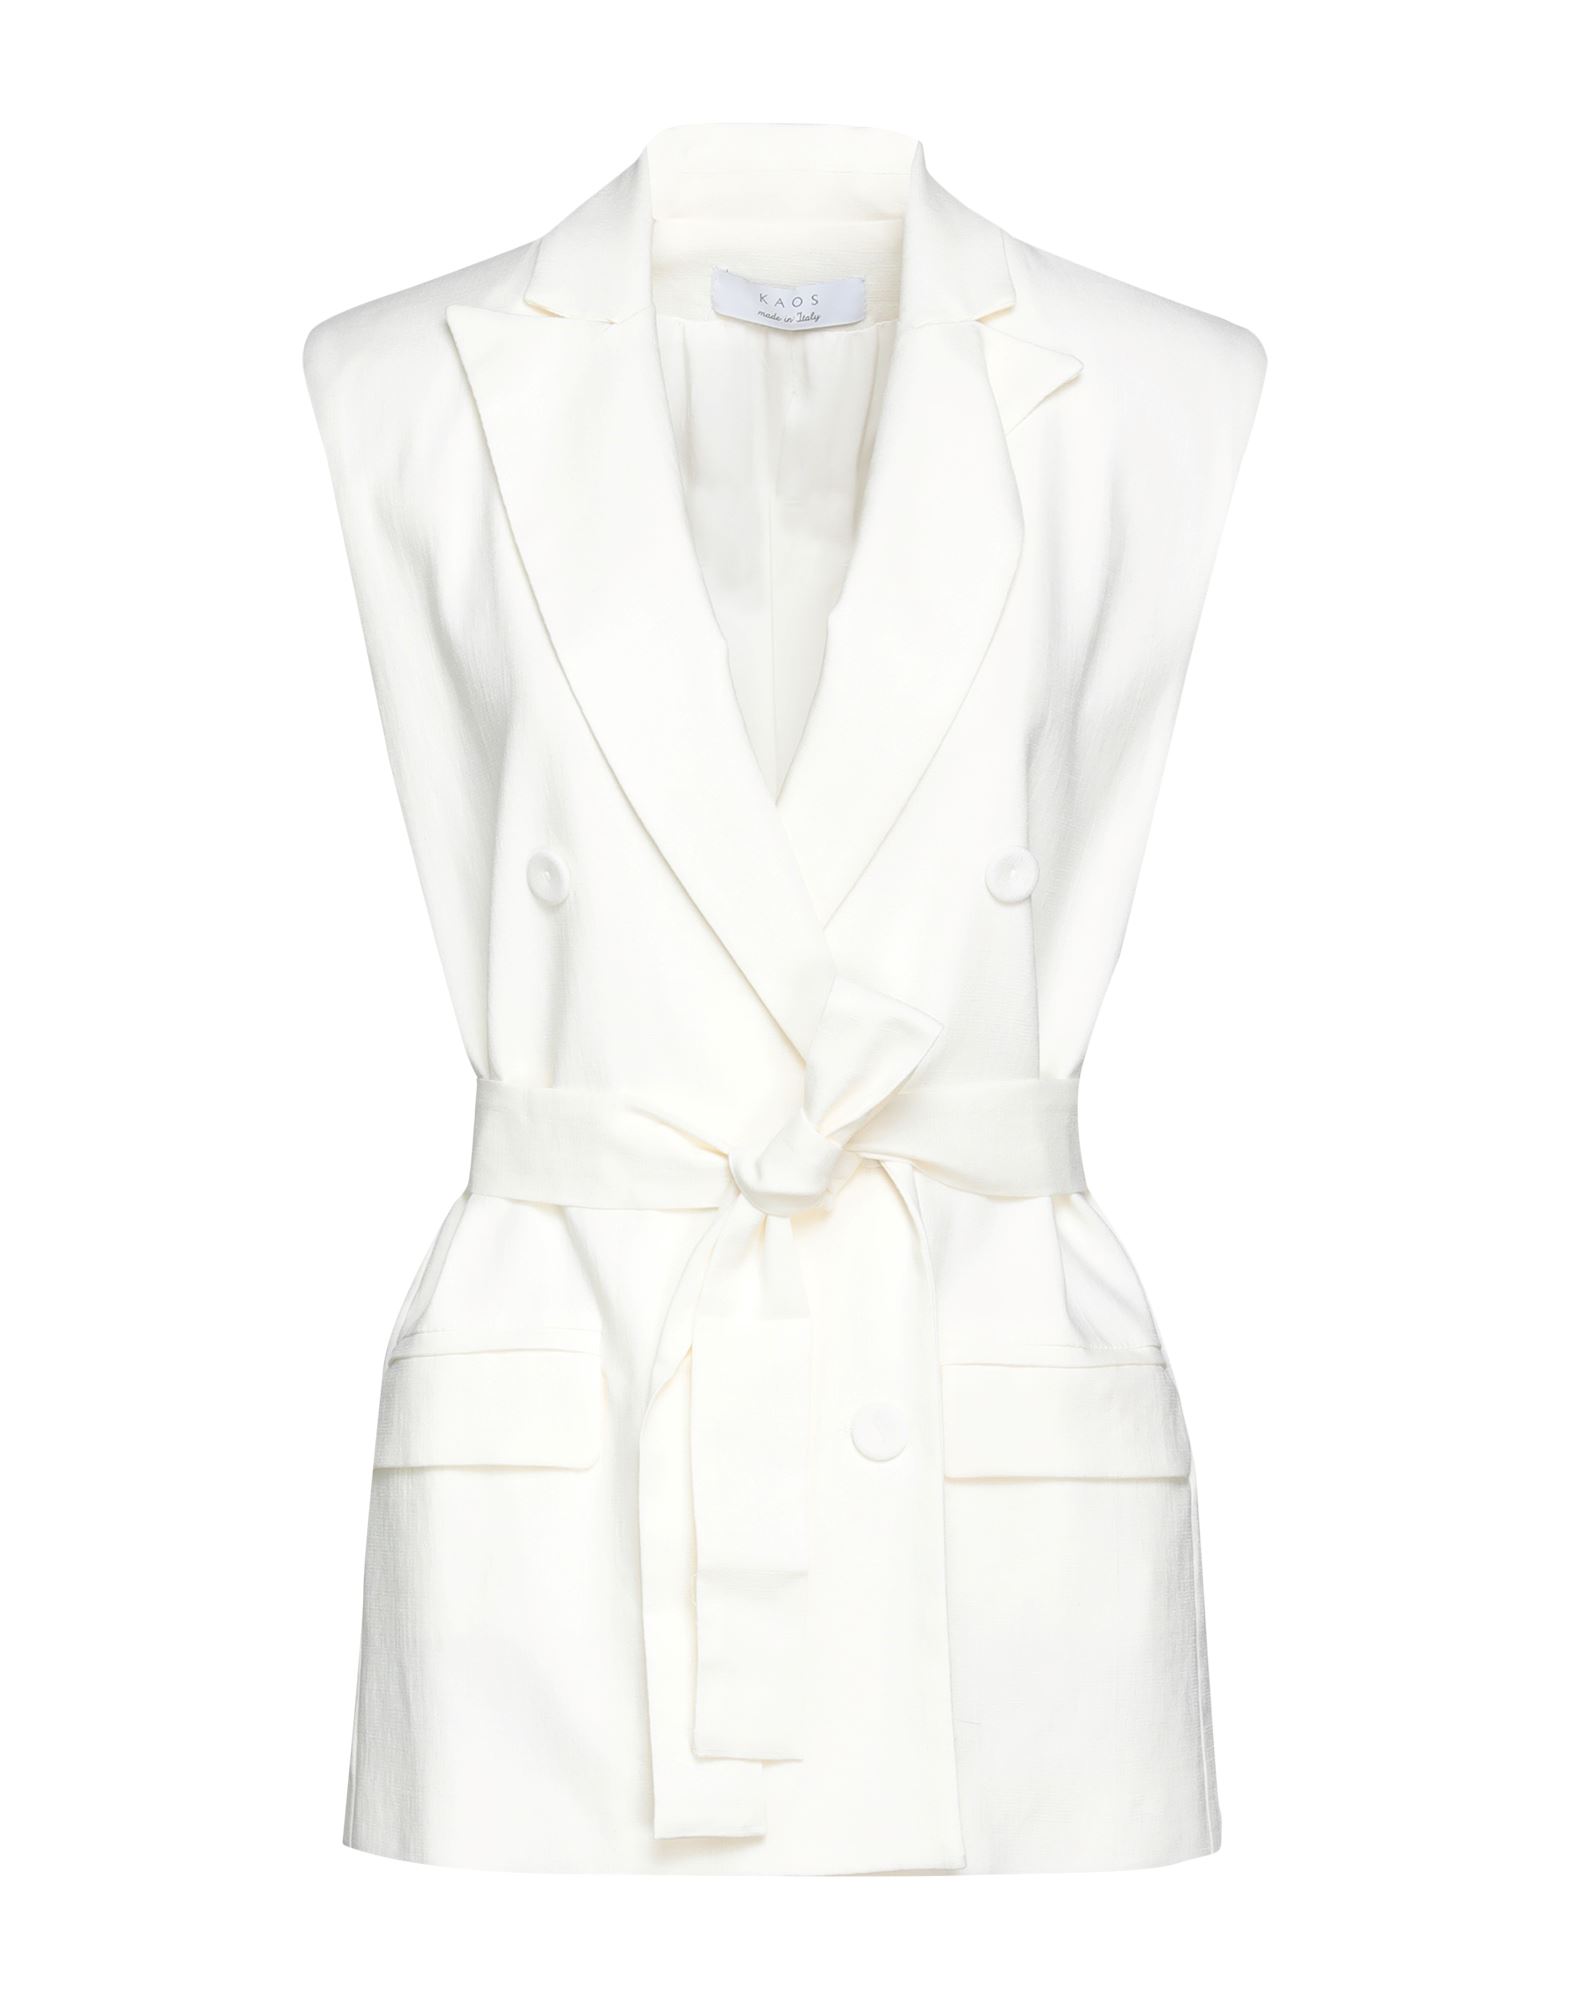 Kaos Suit Jackets In White